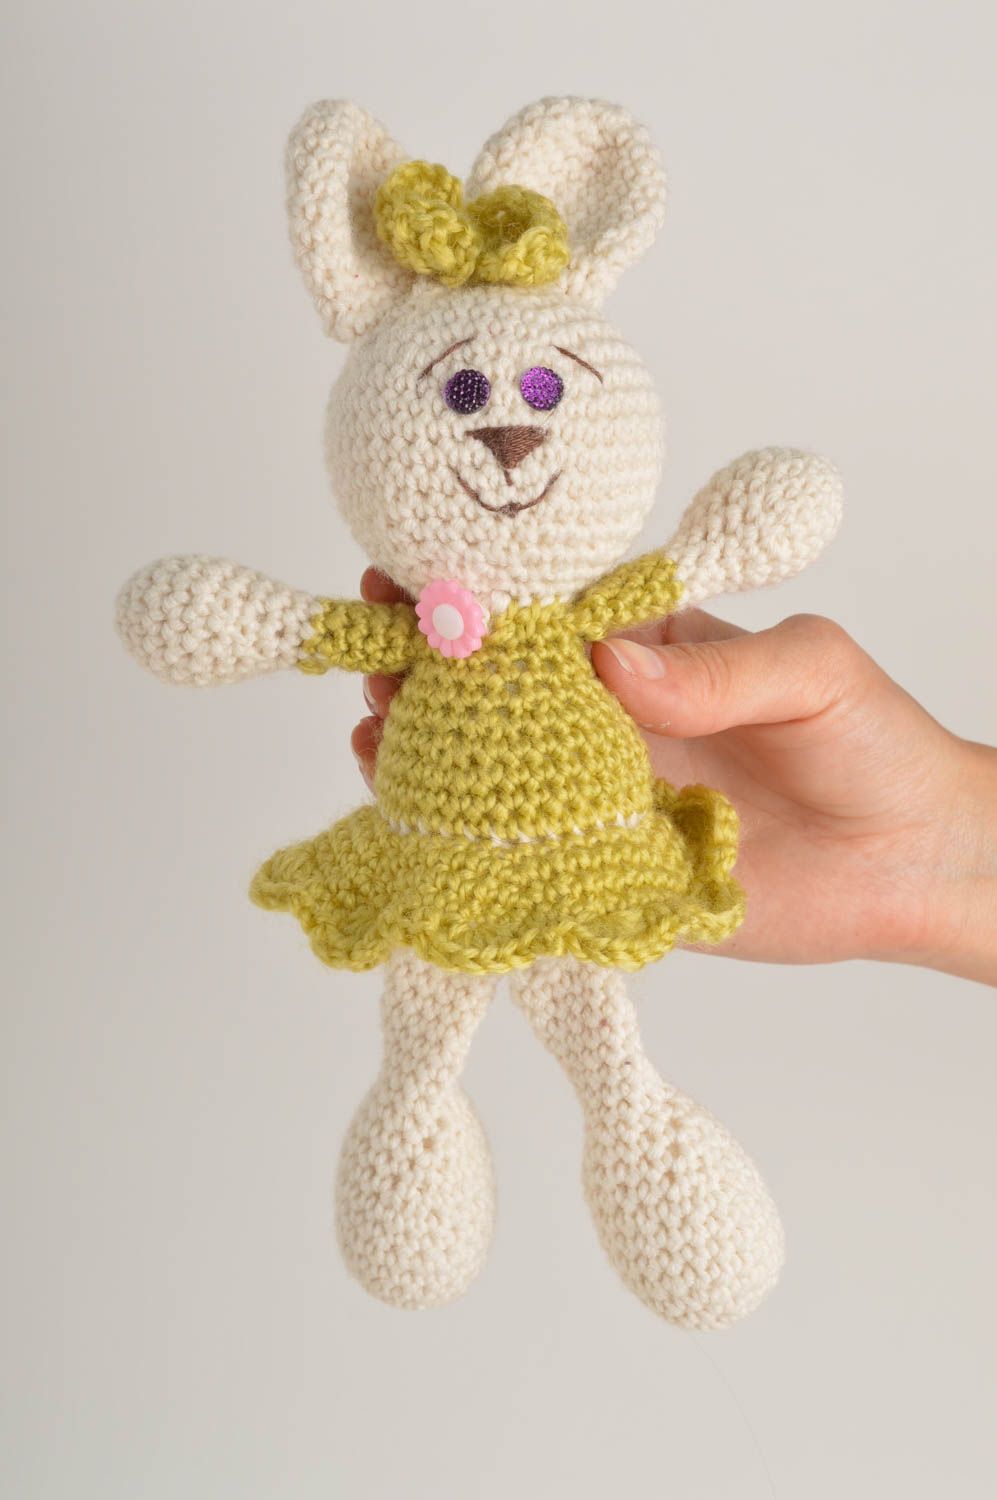 Beautiful handmade crochet toy soft toy cute toys for kids birthday gift ideas photo 2